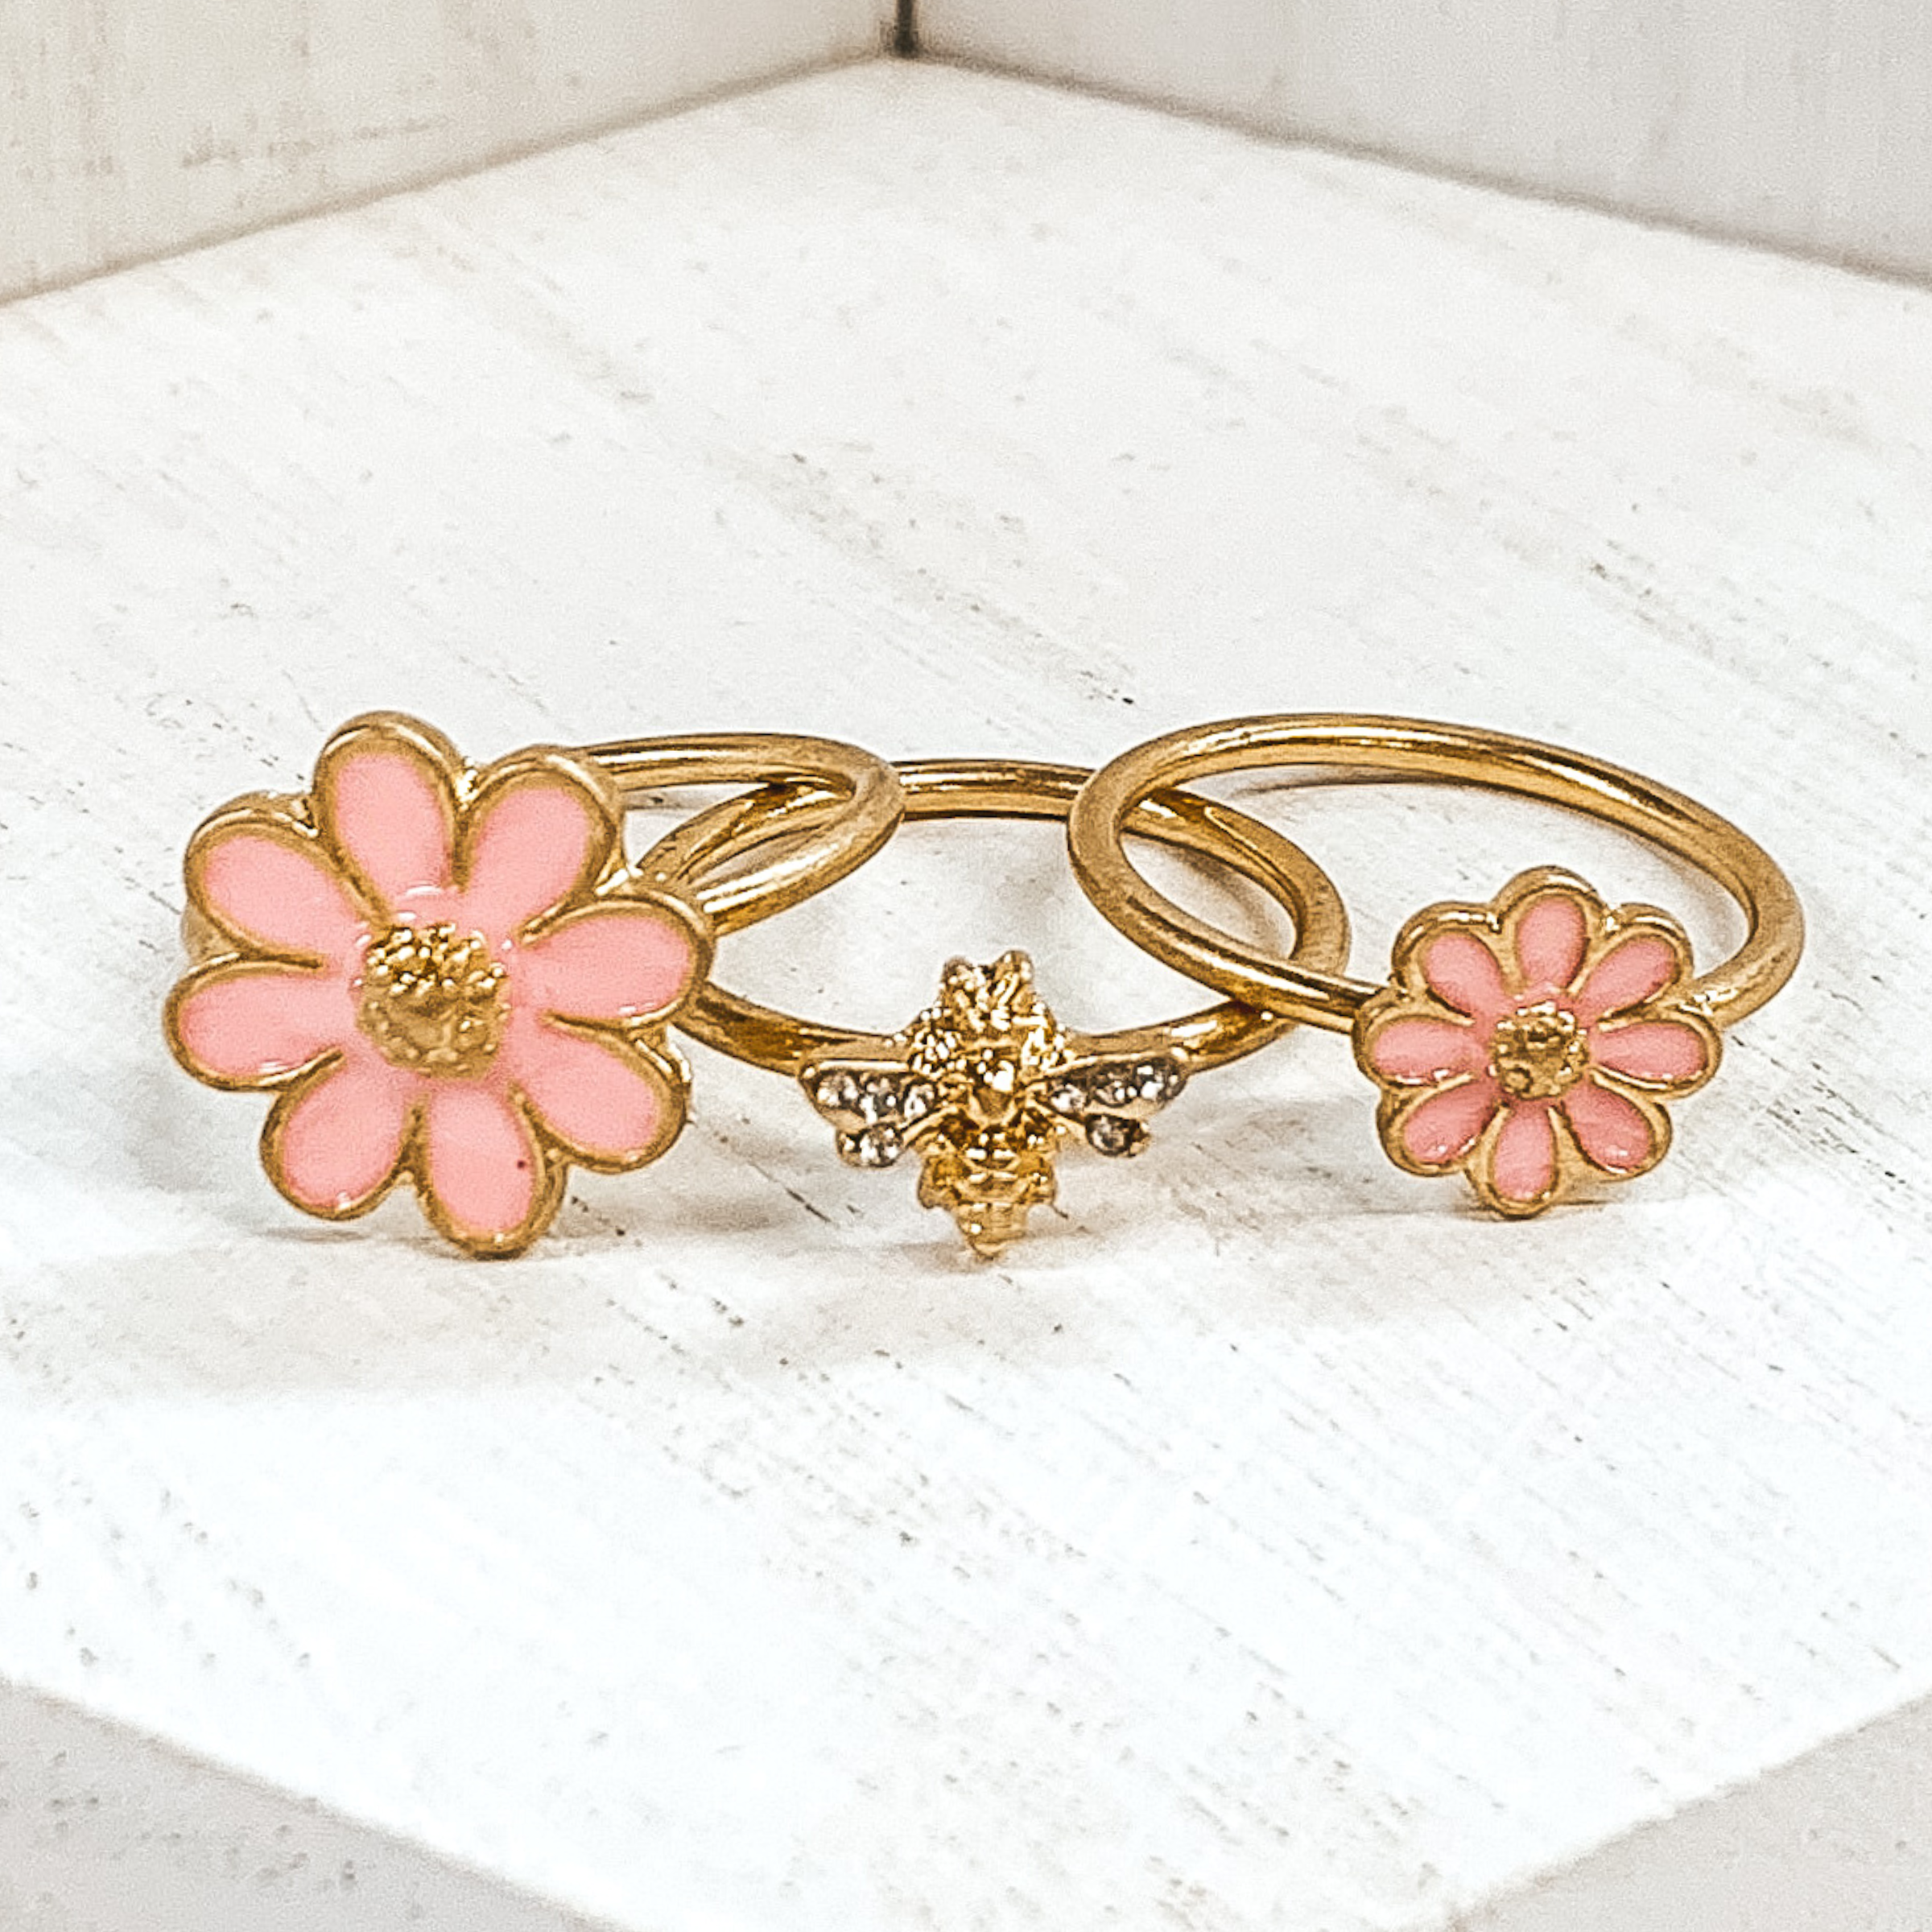 Set of three gold rings. Two rings have a pink flower pendant that is outlined in gold. One flower is bigger than the other. The last ring has a gold bee pendant with clear crystals on the wings. These rings are pictured on a white background. 